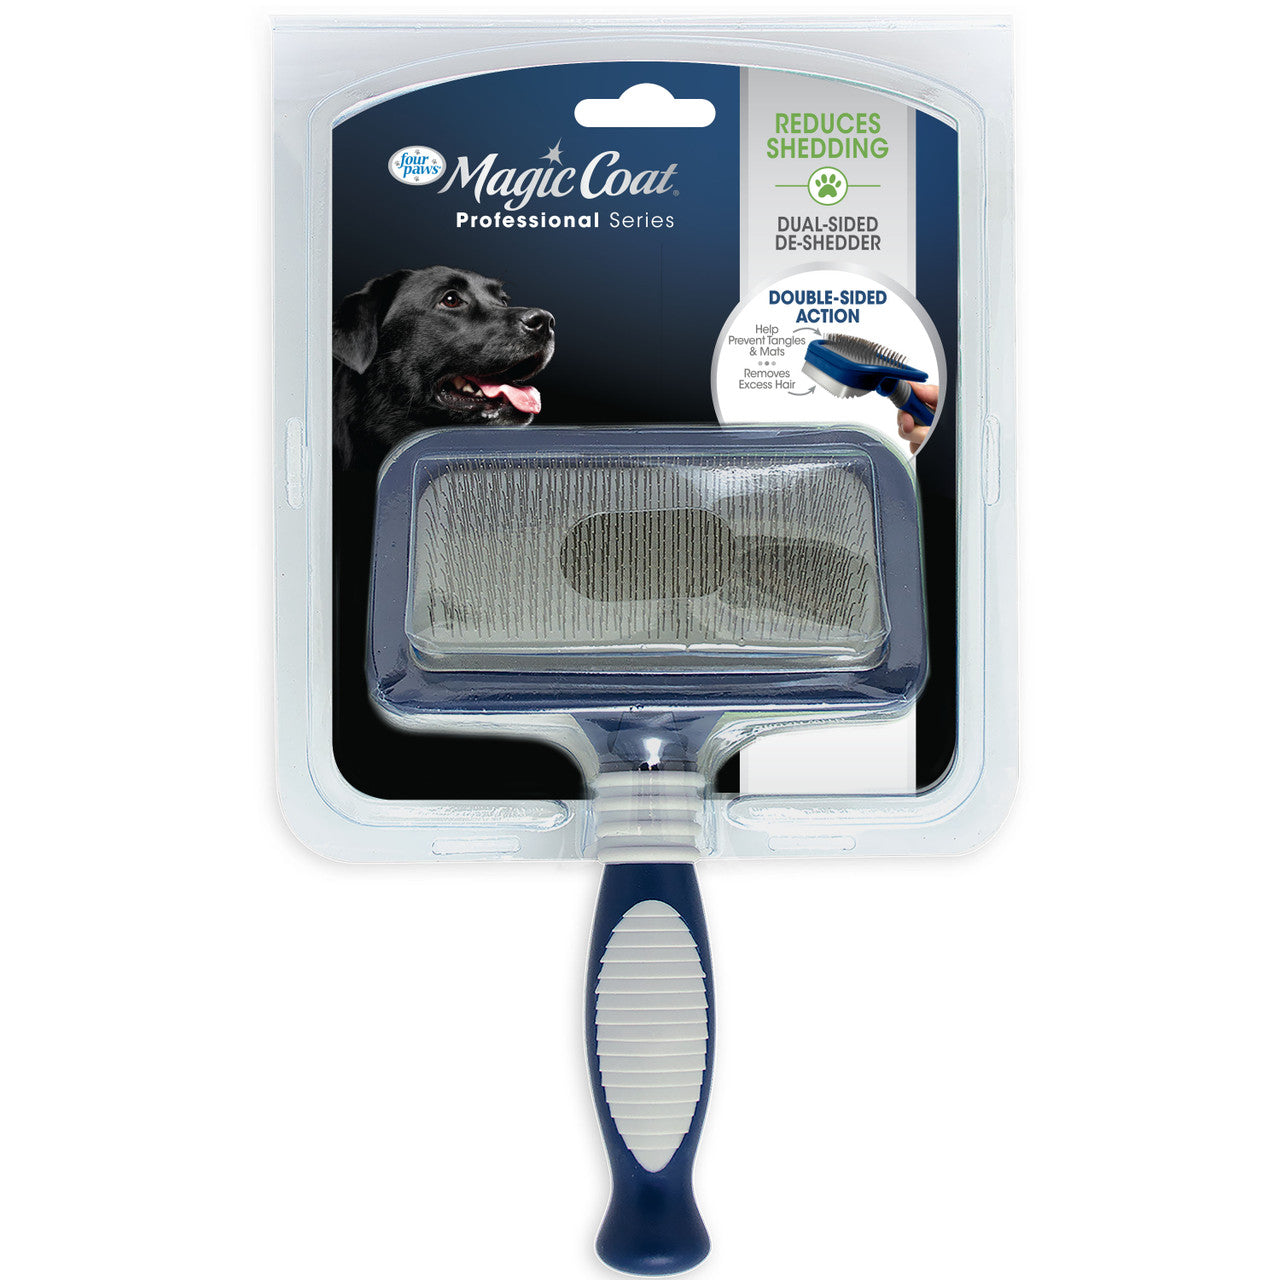 Four Paws Magic Coat Professional Series Dual-Sided Deshedder for Dogs